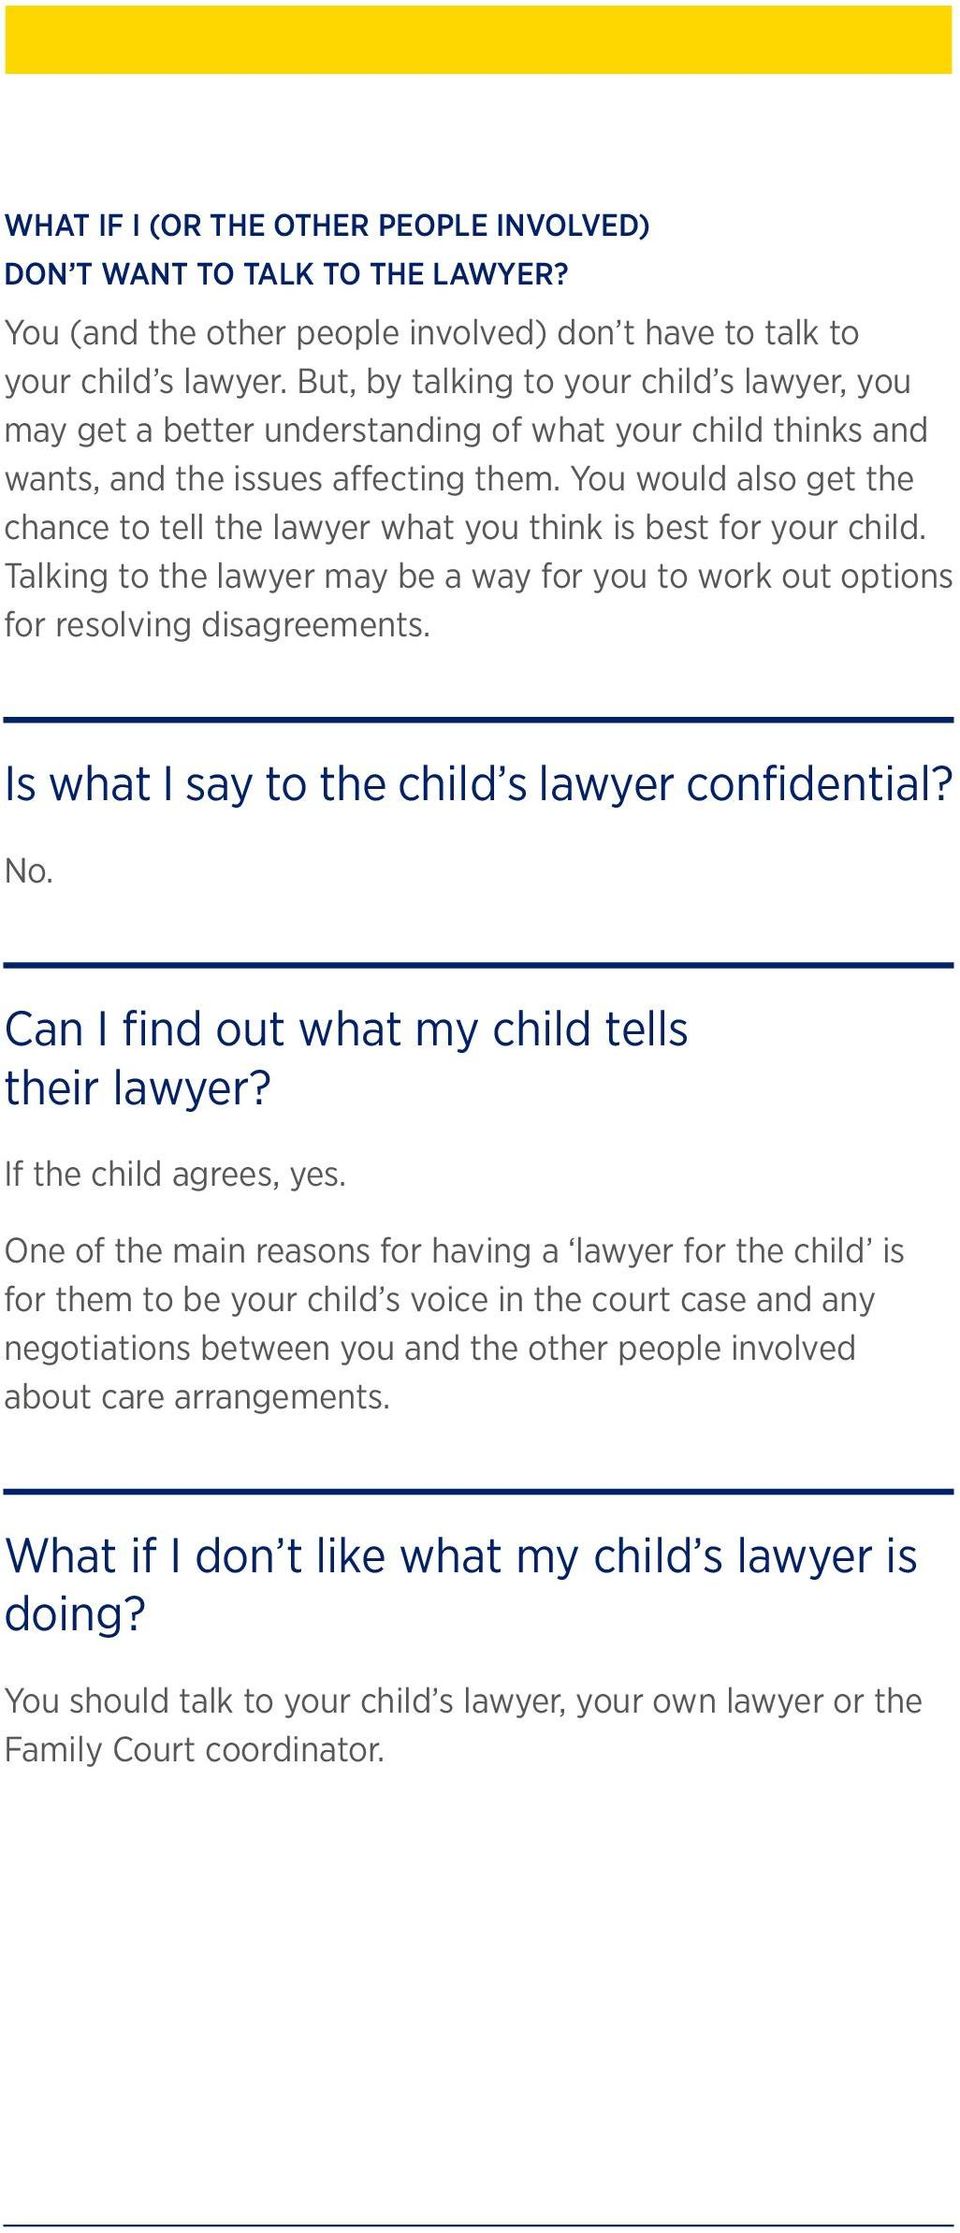 You would also get the chance to tell the lawyer what you think is best for your child. Talking to the lawyer may be a way for you to work out options for resolving disagreements.